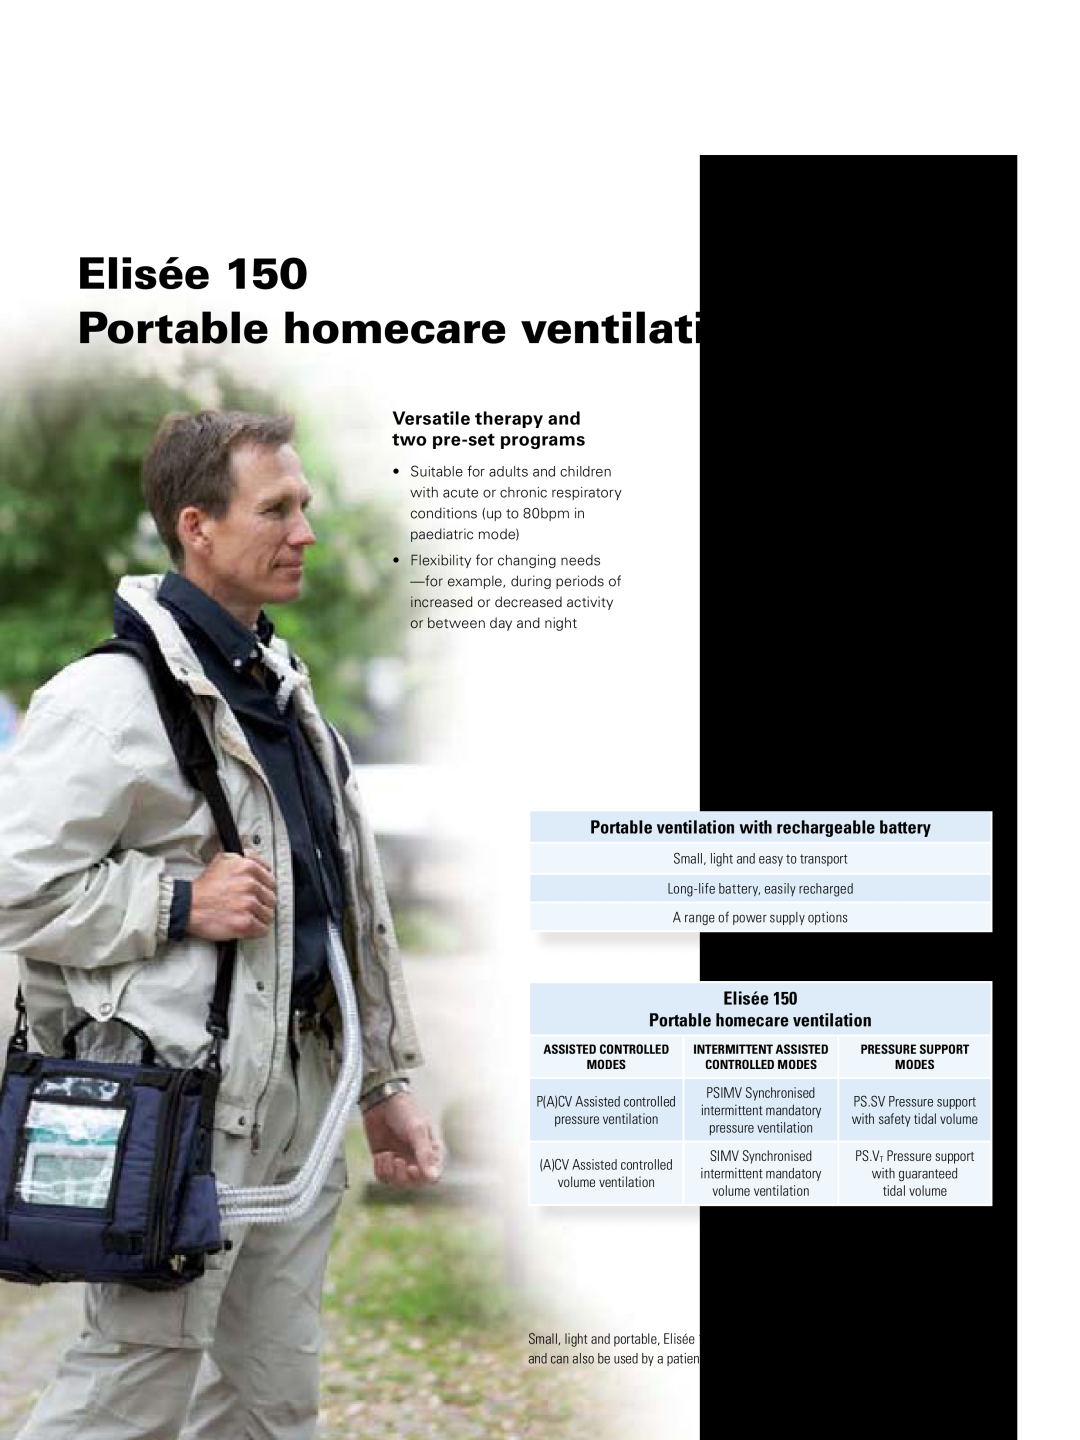 ResMed 150 manual Elisée Portable homecare ventilation, Versatile therapy and, Choice in pressure and, two pre-setprograms 